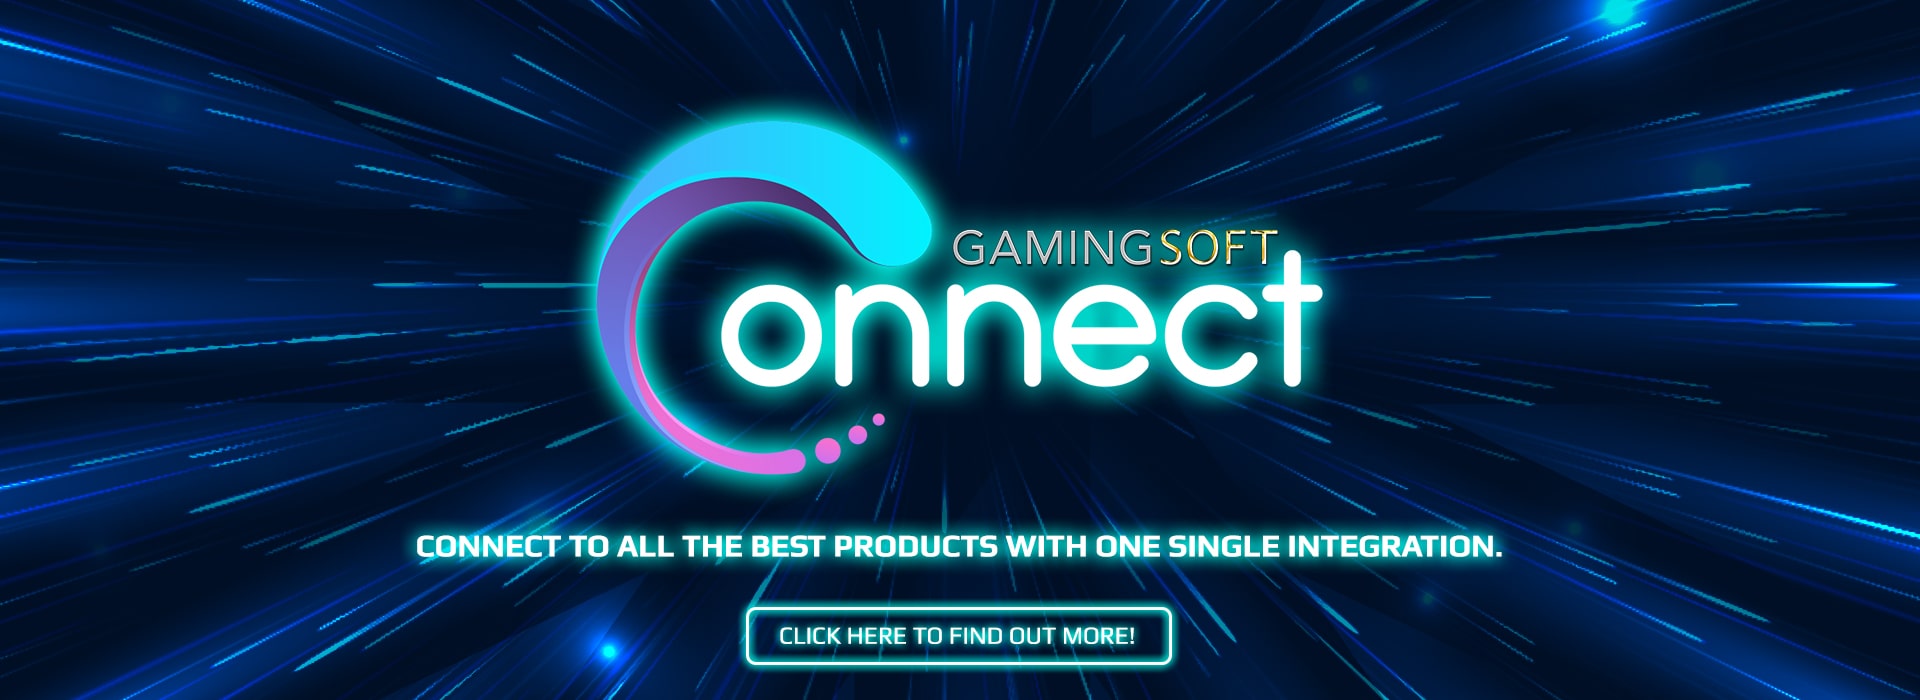 Connect to all the best products with one single integration Web Banner - GamingSoft